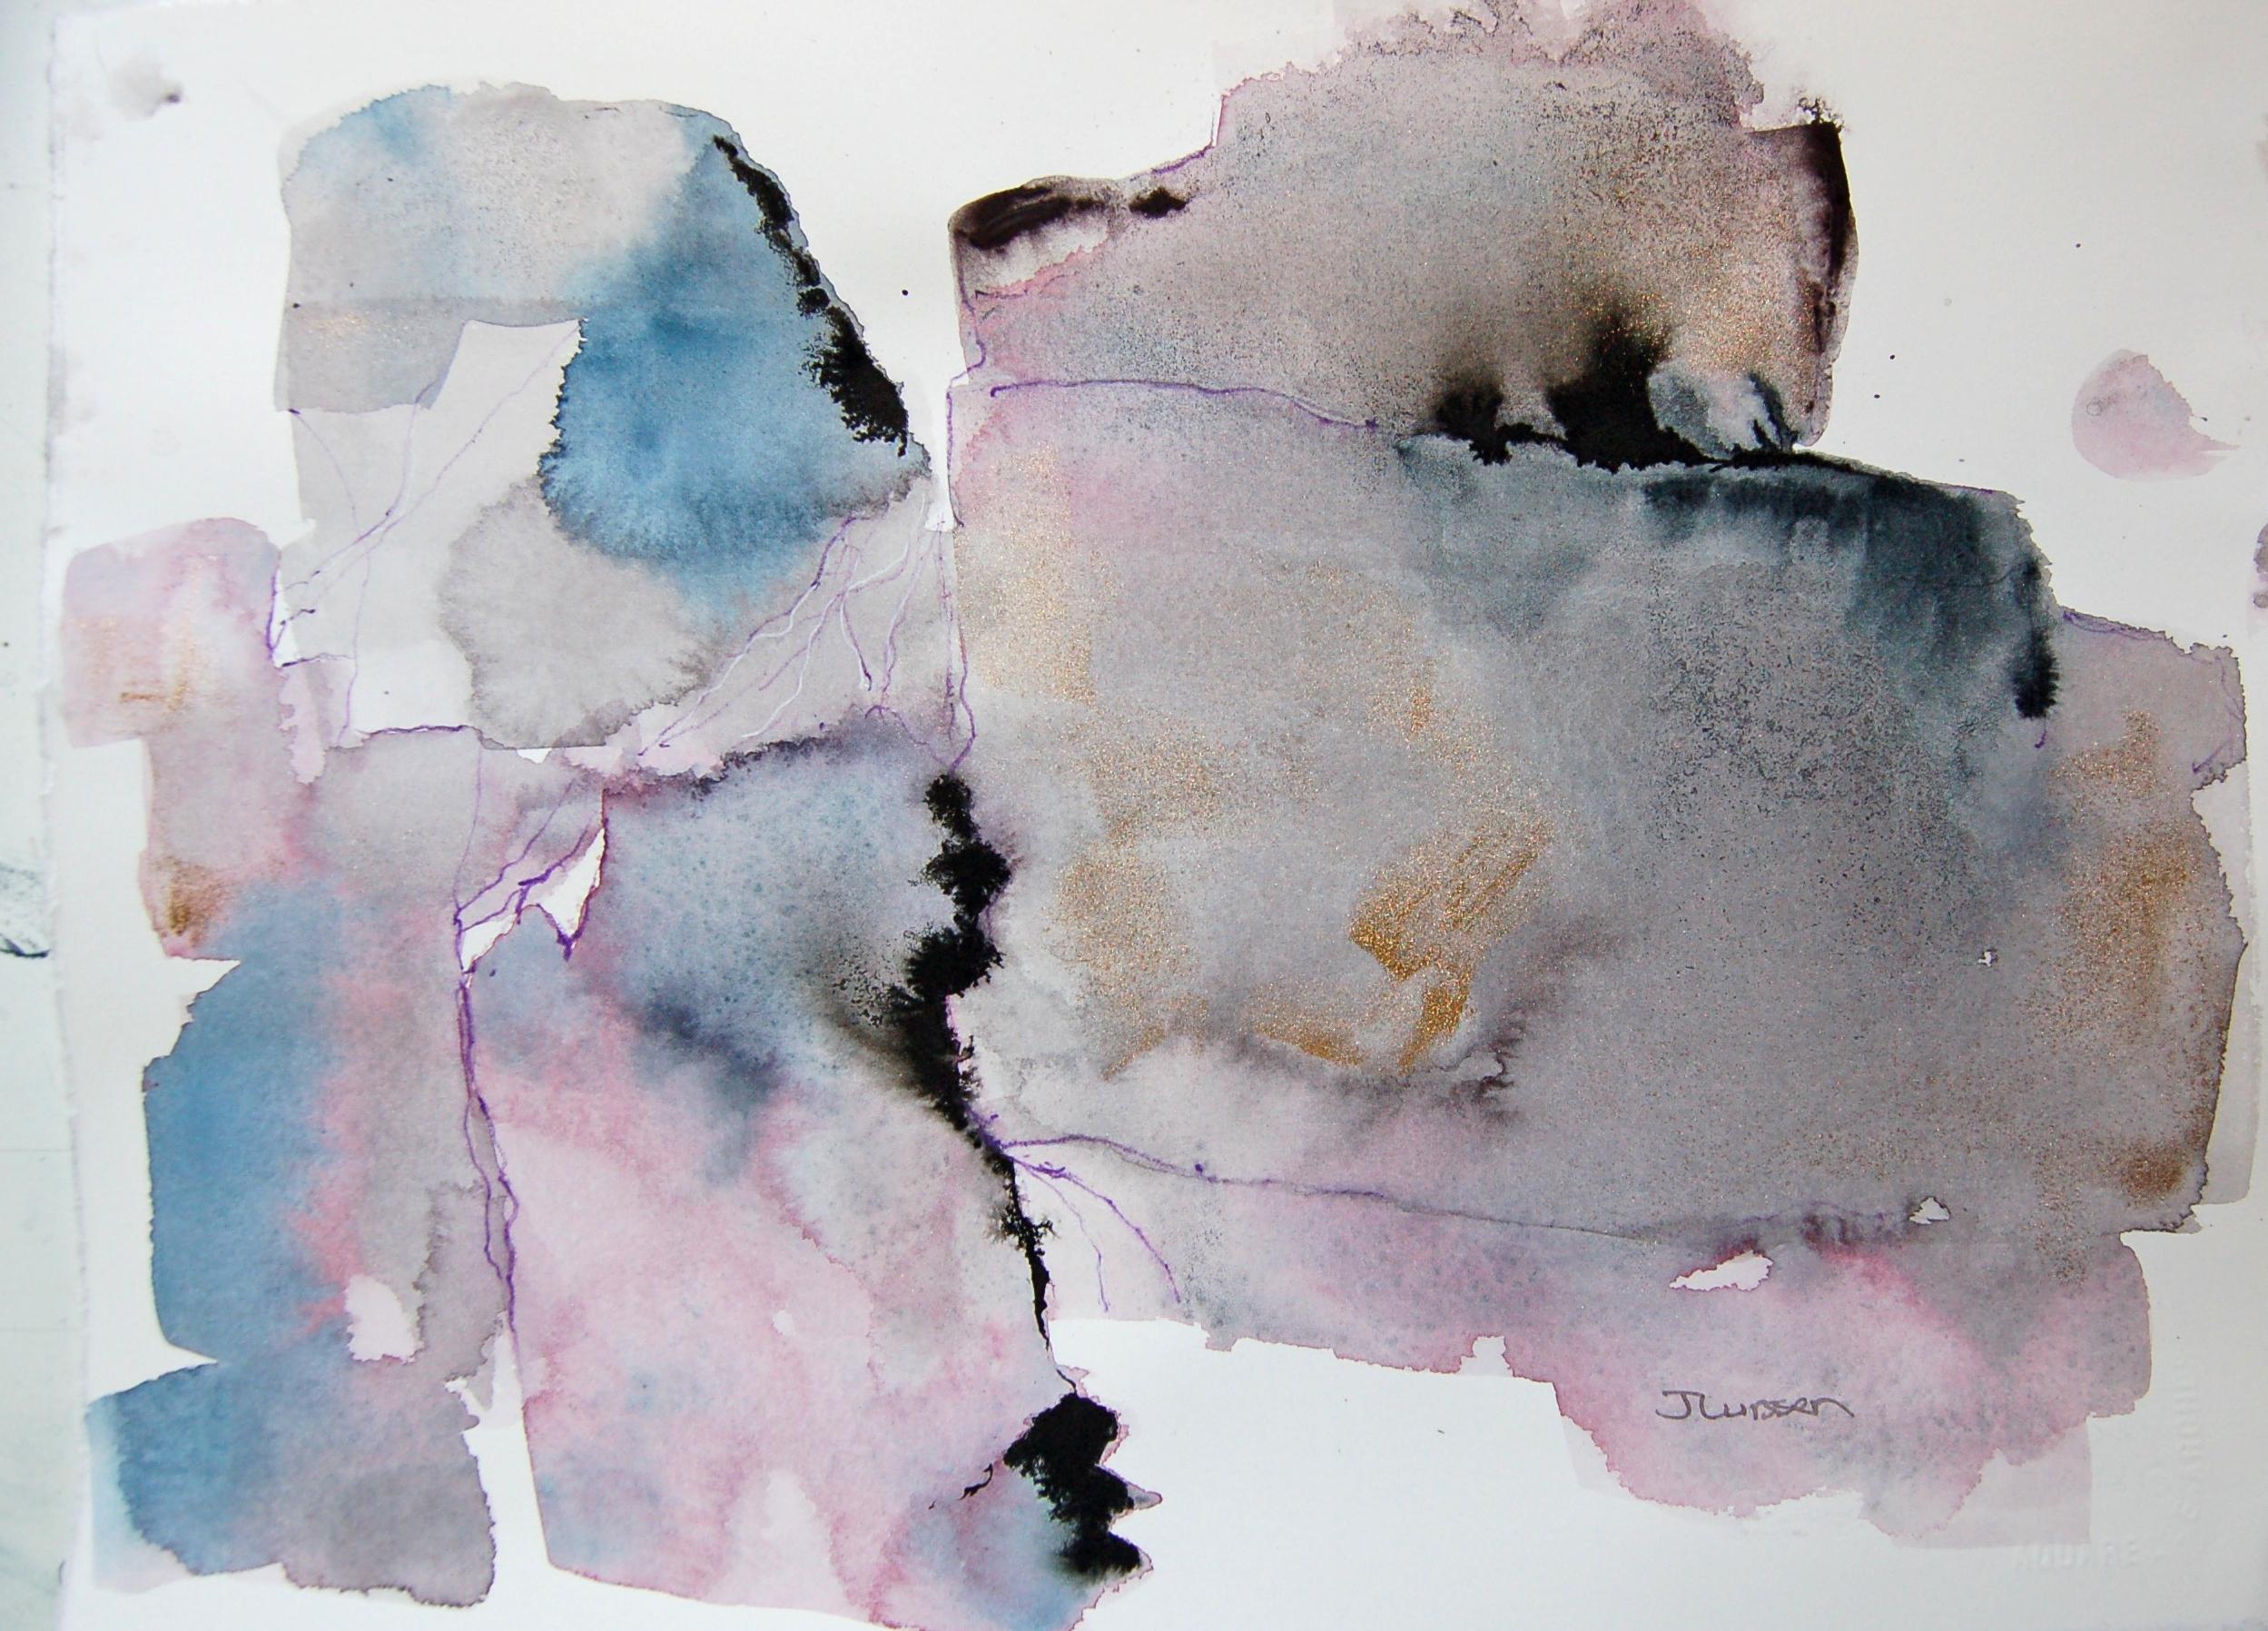 Abstract Patterns III, Mixed Media on Watercolor Paper - Mixed Media Art by Jean Lurssen